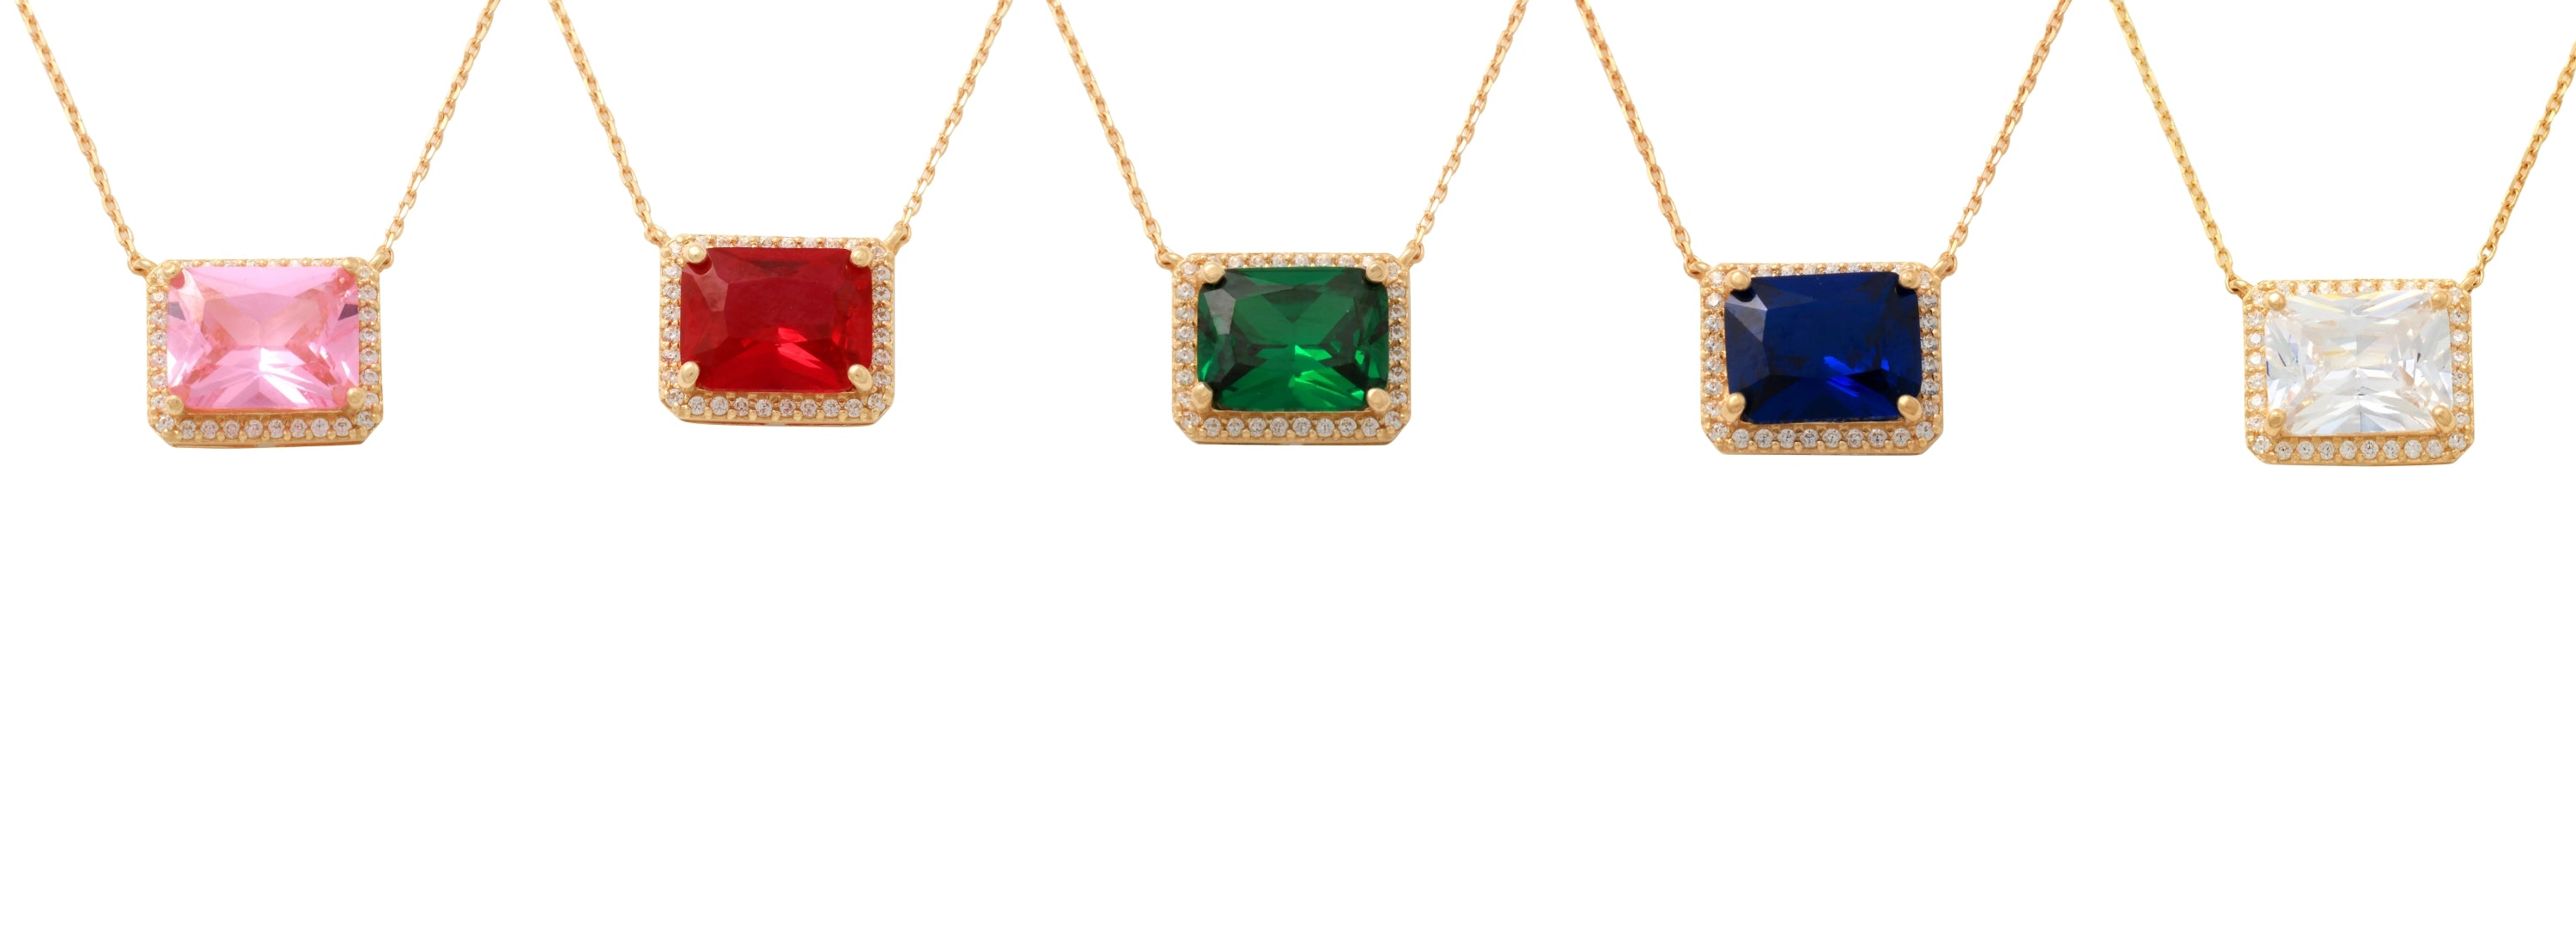 14K Solid Gold Colored CZ Square Necklace - Anygolds 